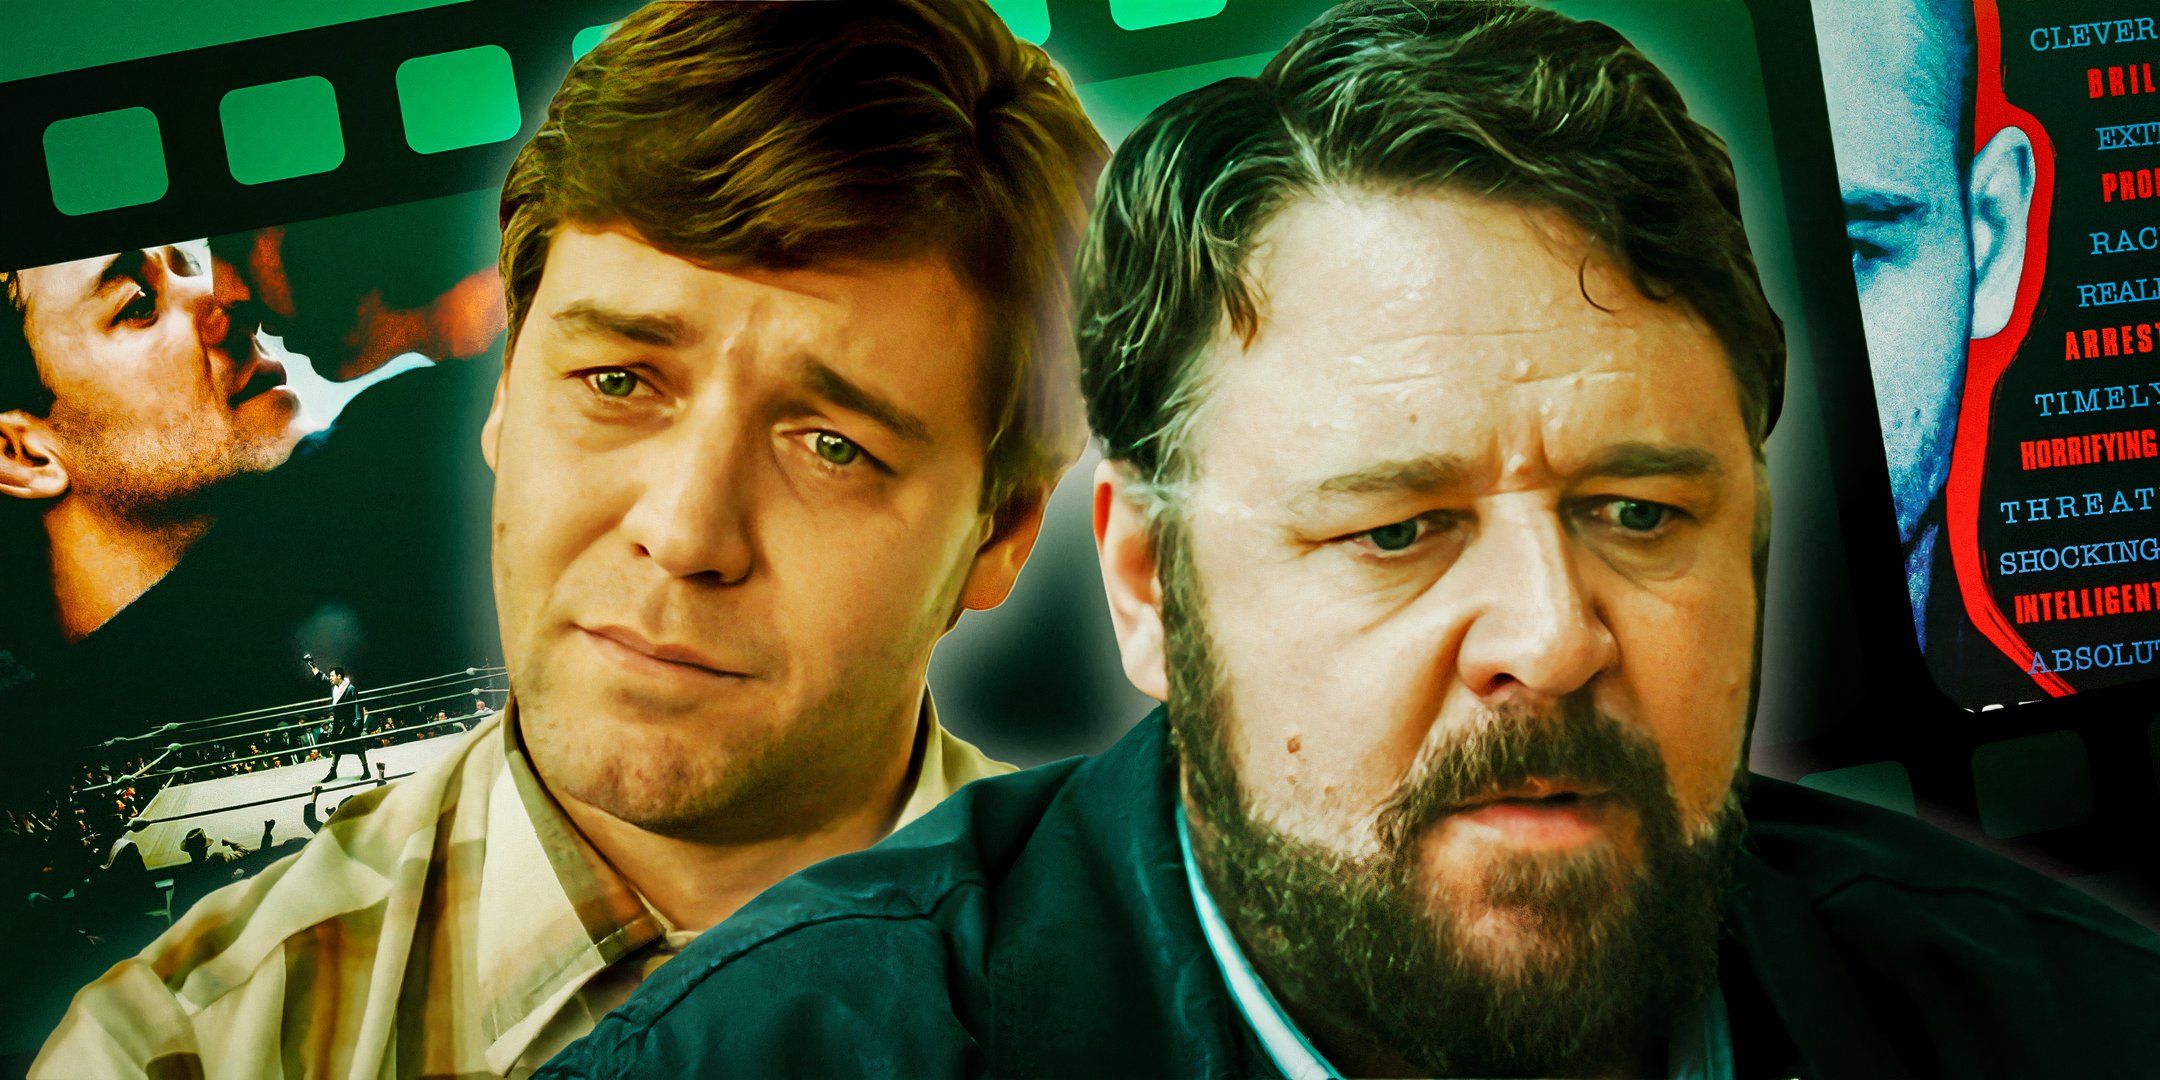 Russell-Crowe-as-John-Nash-from-A-Beautiful-Mind-and-Russell-Crowe-as-Man-from-Unhinged